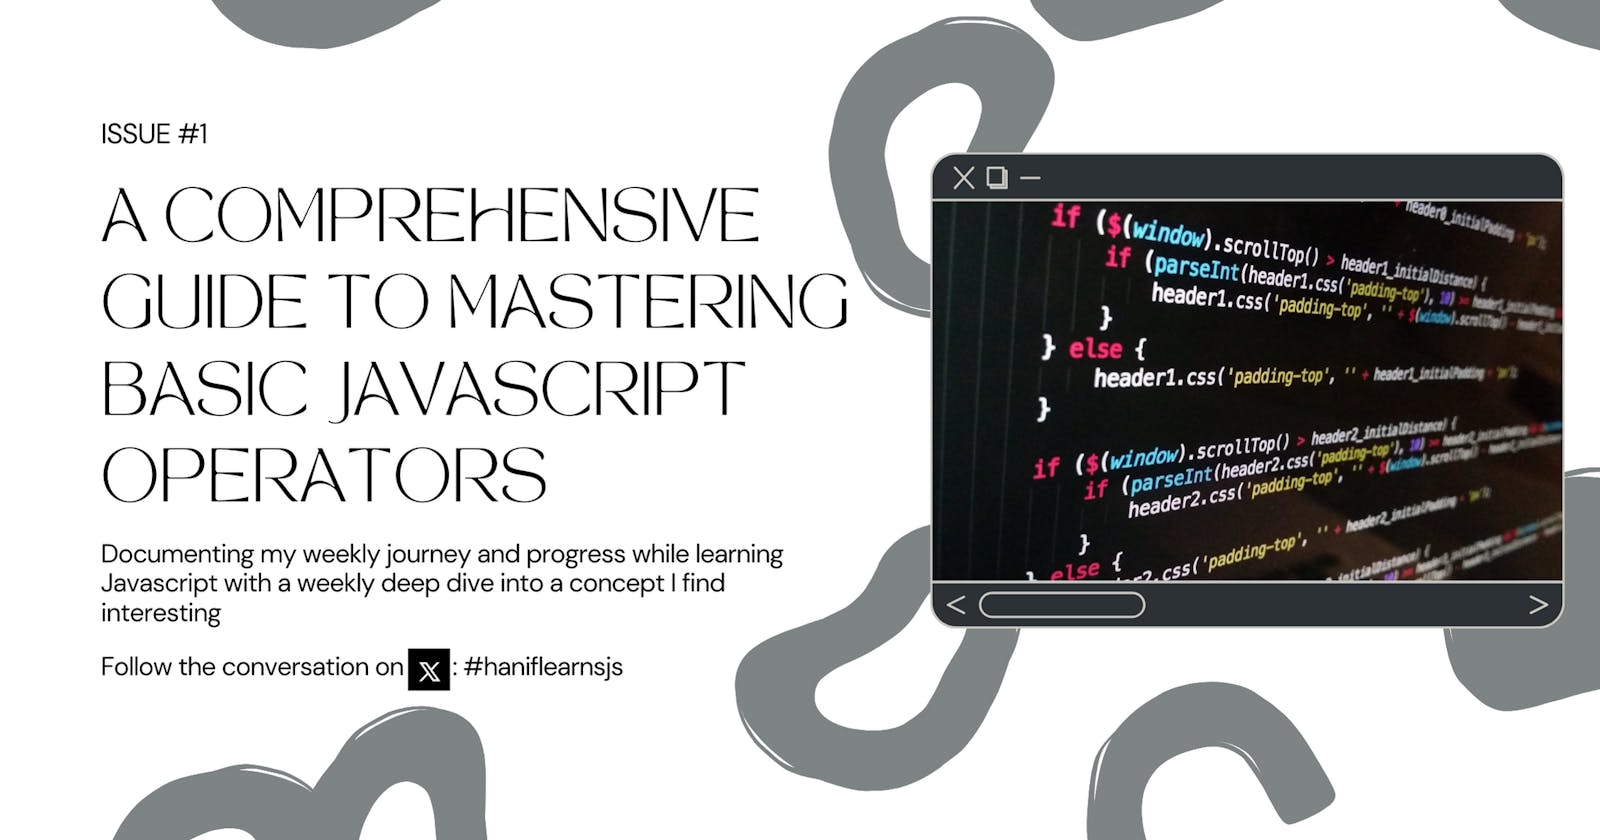 A Comprehensive Guide to Mastering Basic Javascript Operators